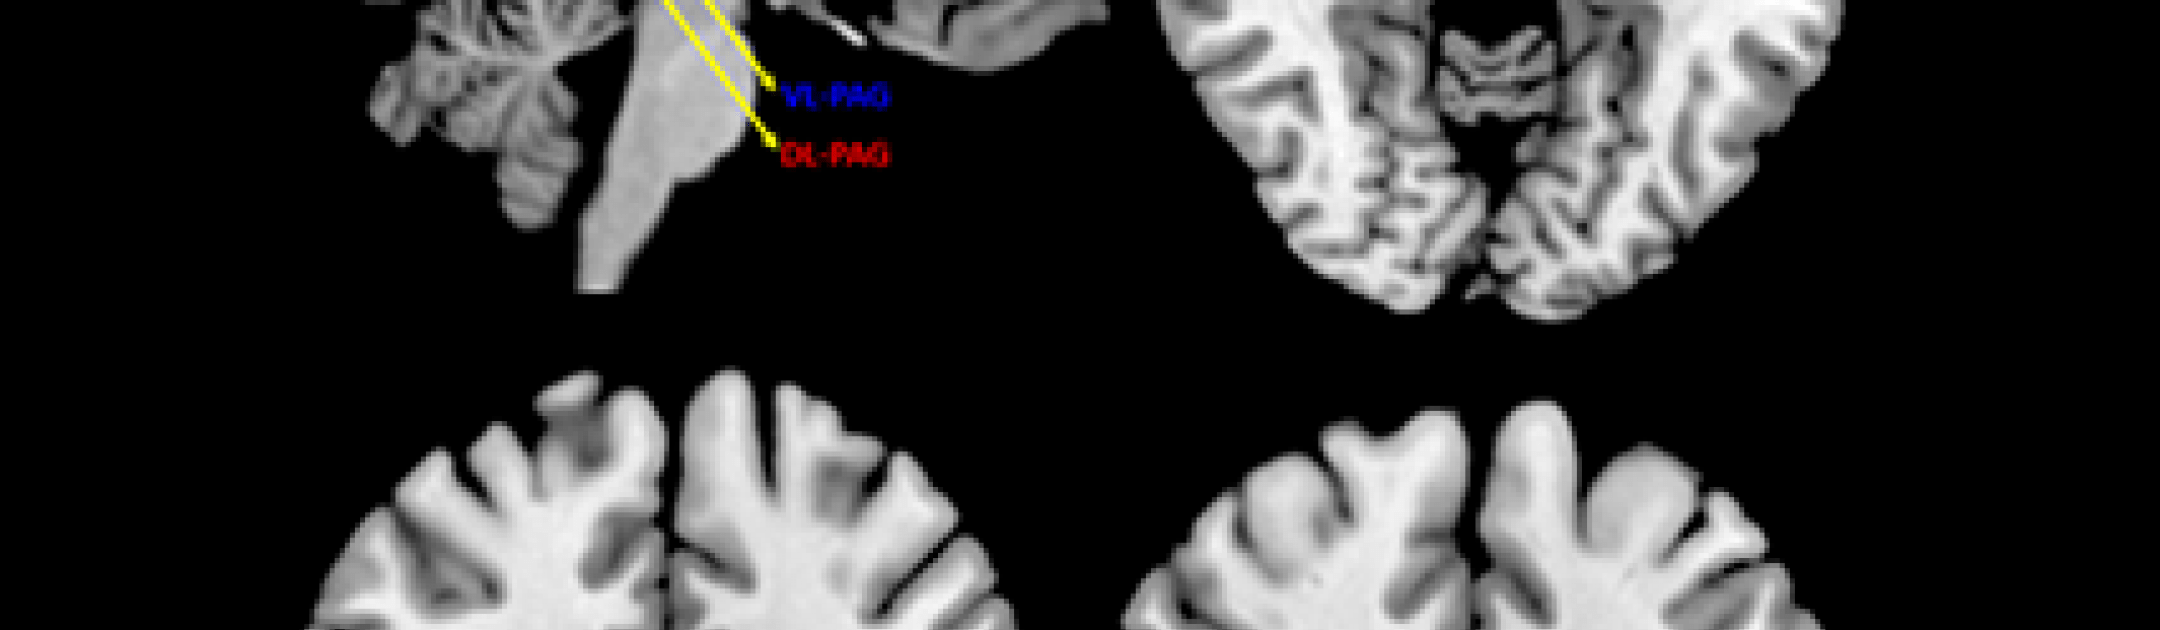 Brain scans with PAG marked